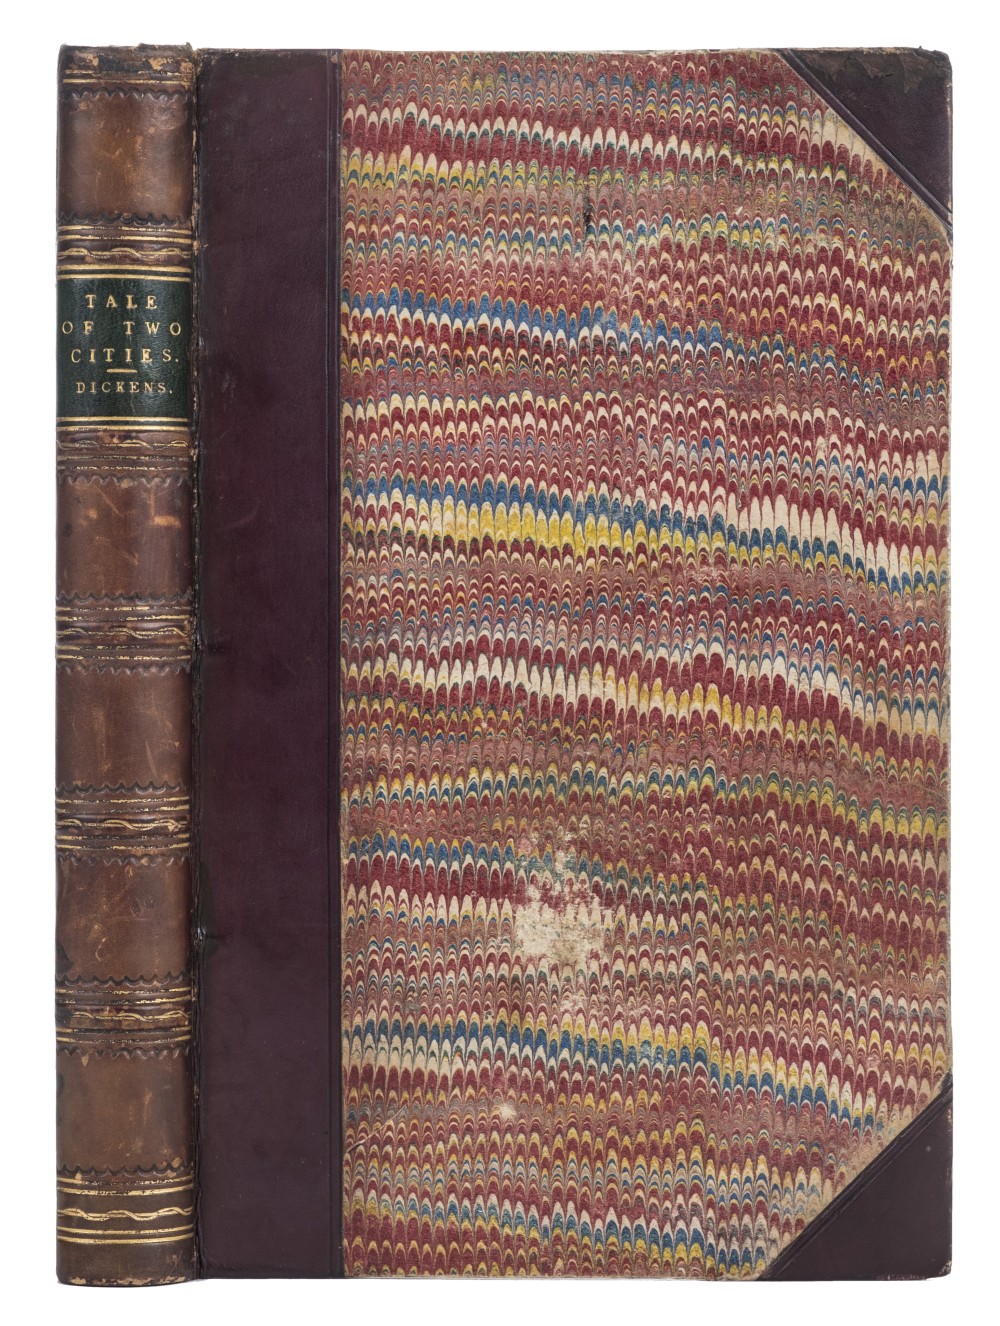 Dickens (Charles). A Tale of Two Cities, 1st edition, 1st issue, Chapman and Hall, 1859, 1st issue